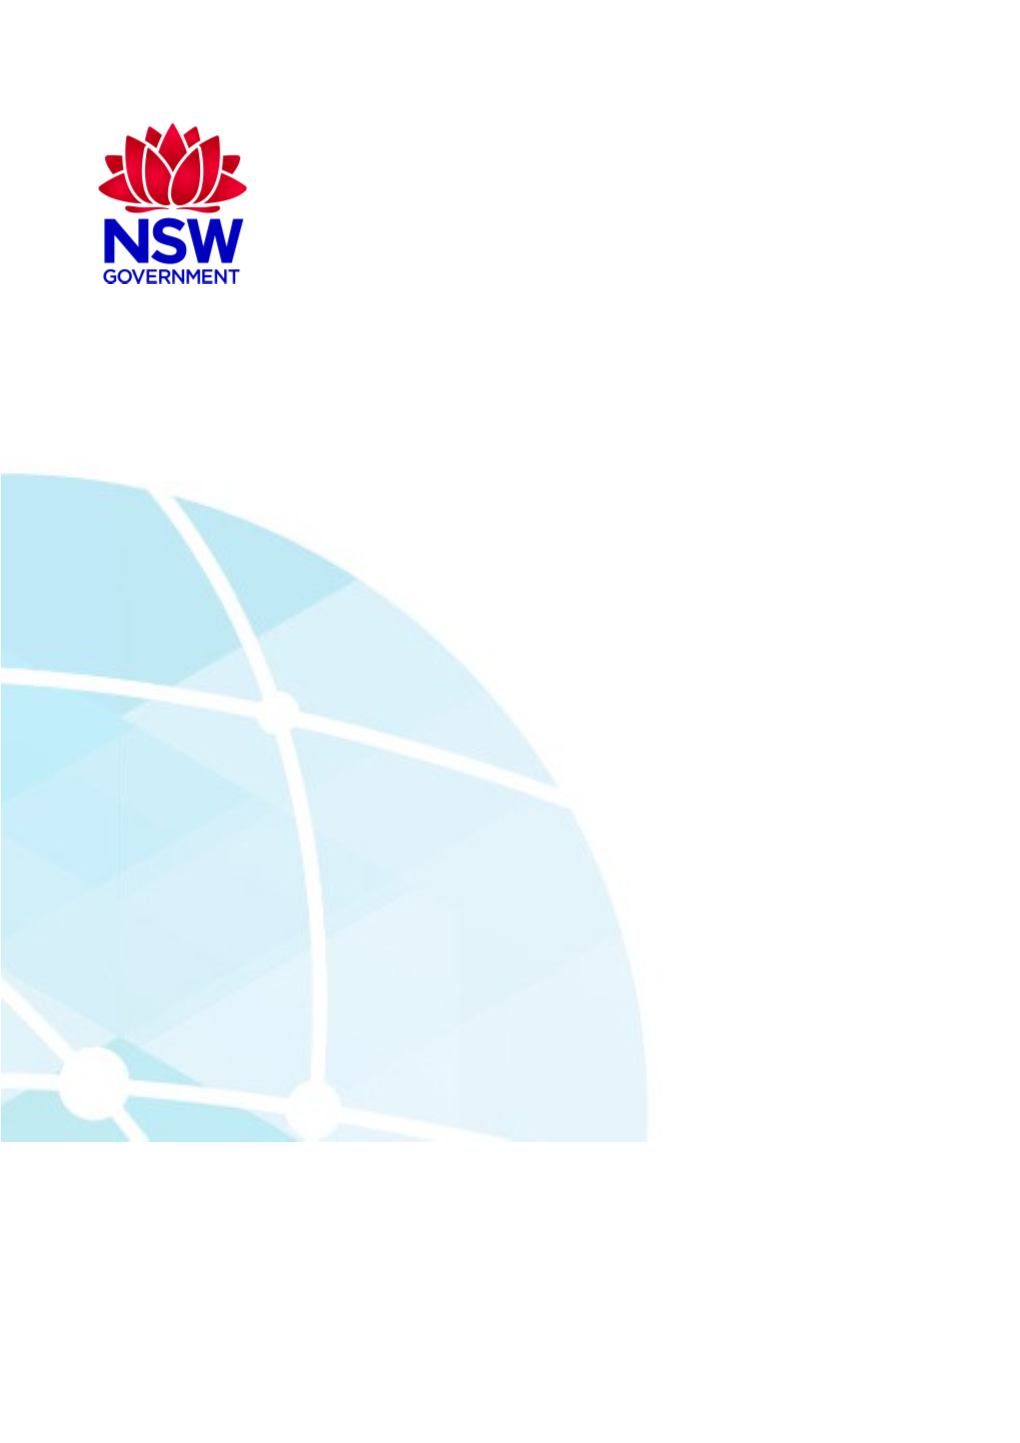 NSW Government Mobile Device & Application Framework